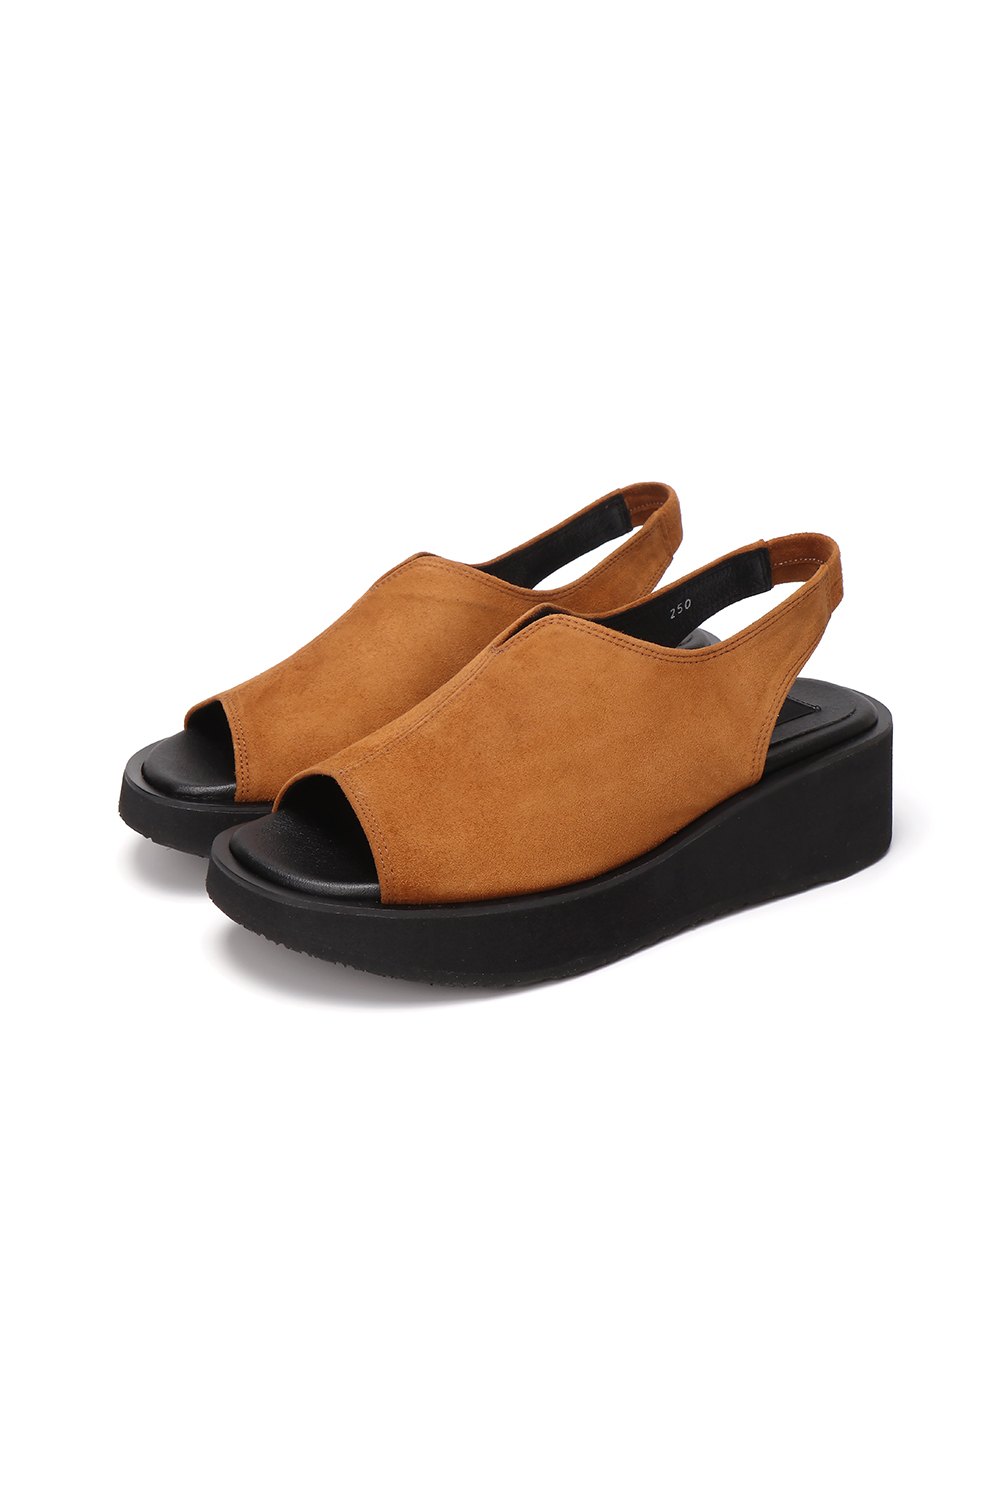 COY CHUNKY SANDALS [CAMEL]